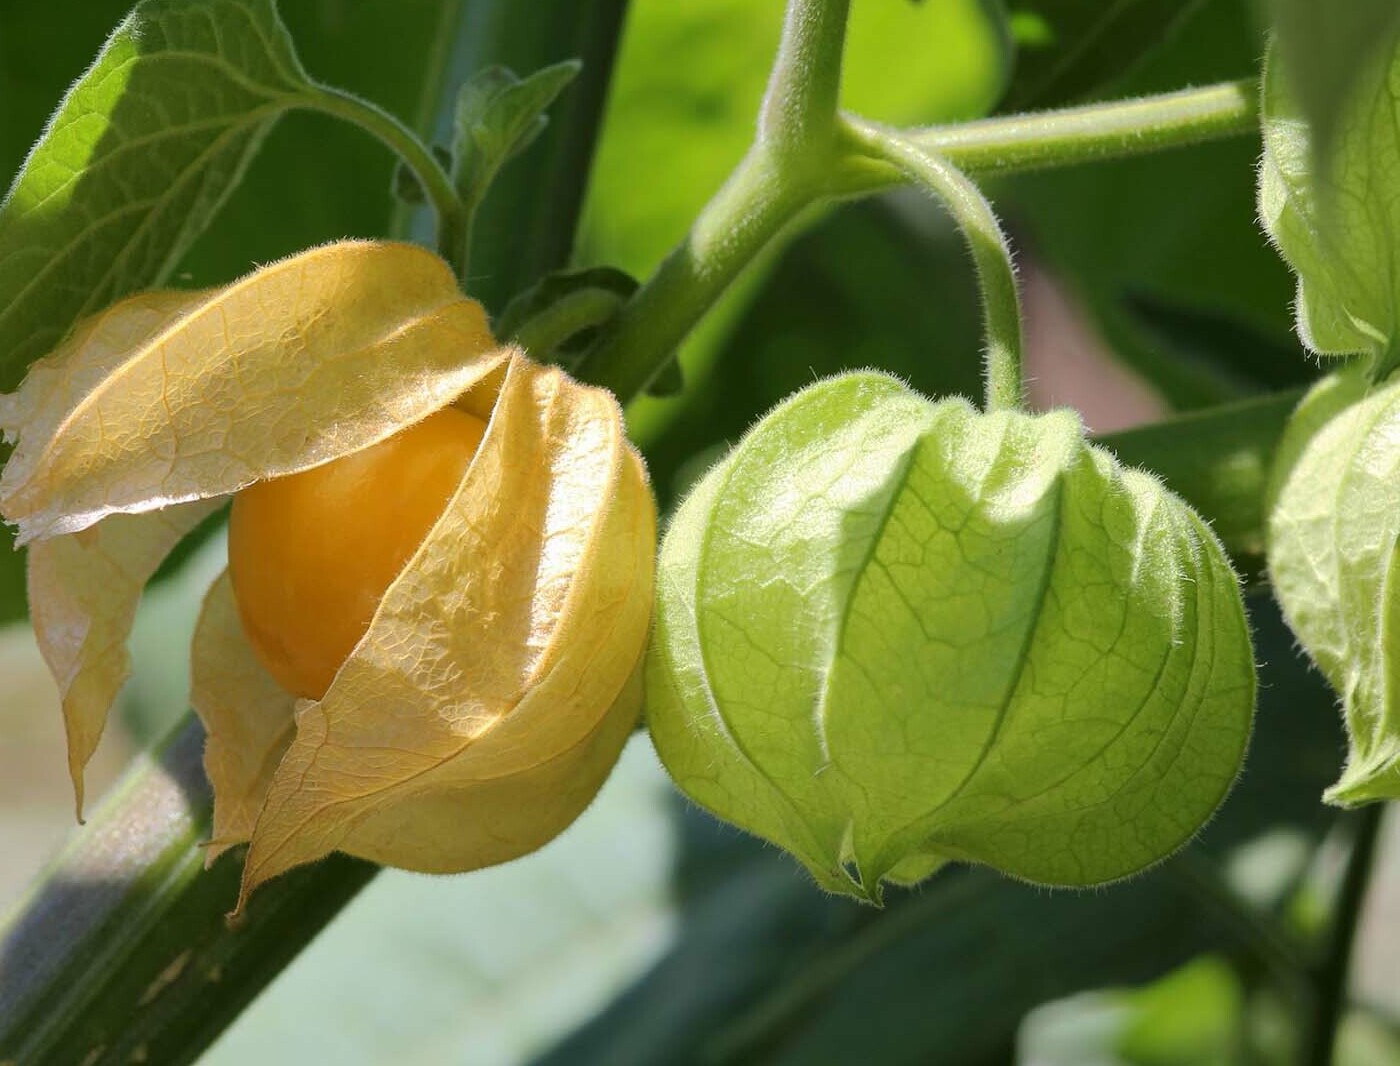 Physalis – what kind of plant is it and what does it look like?